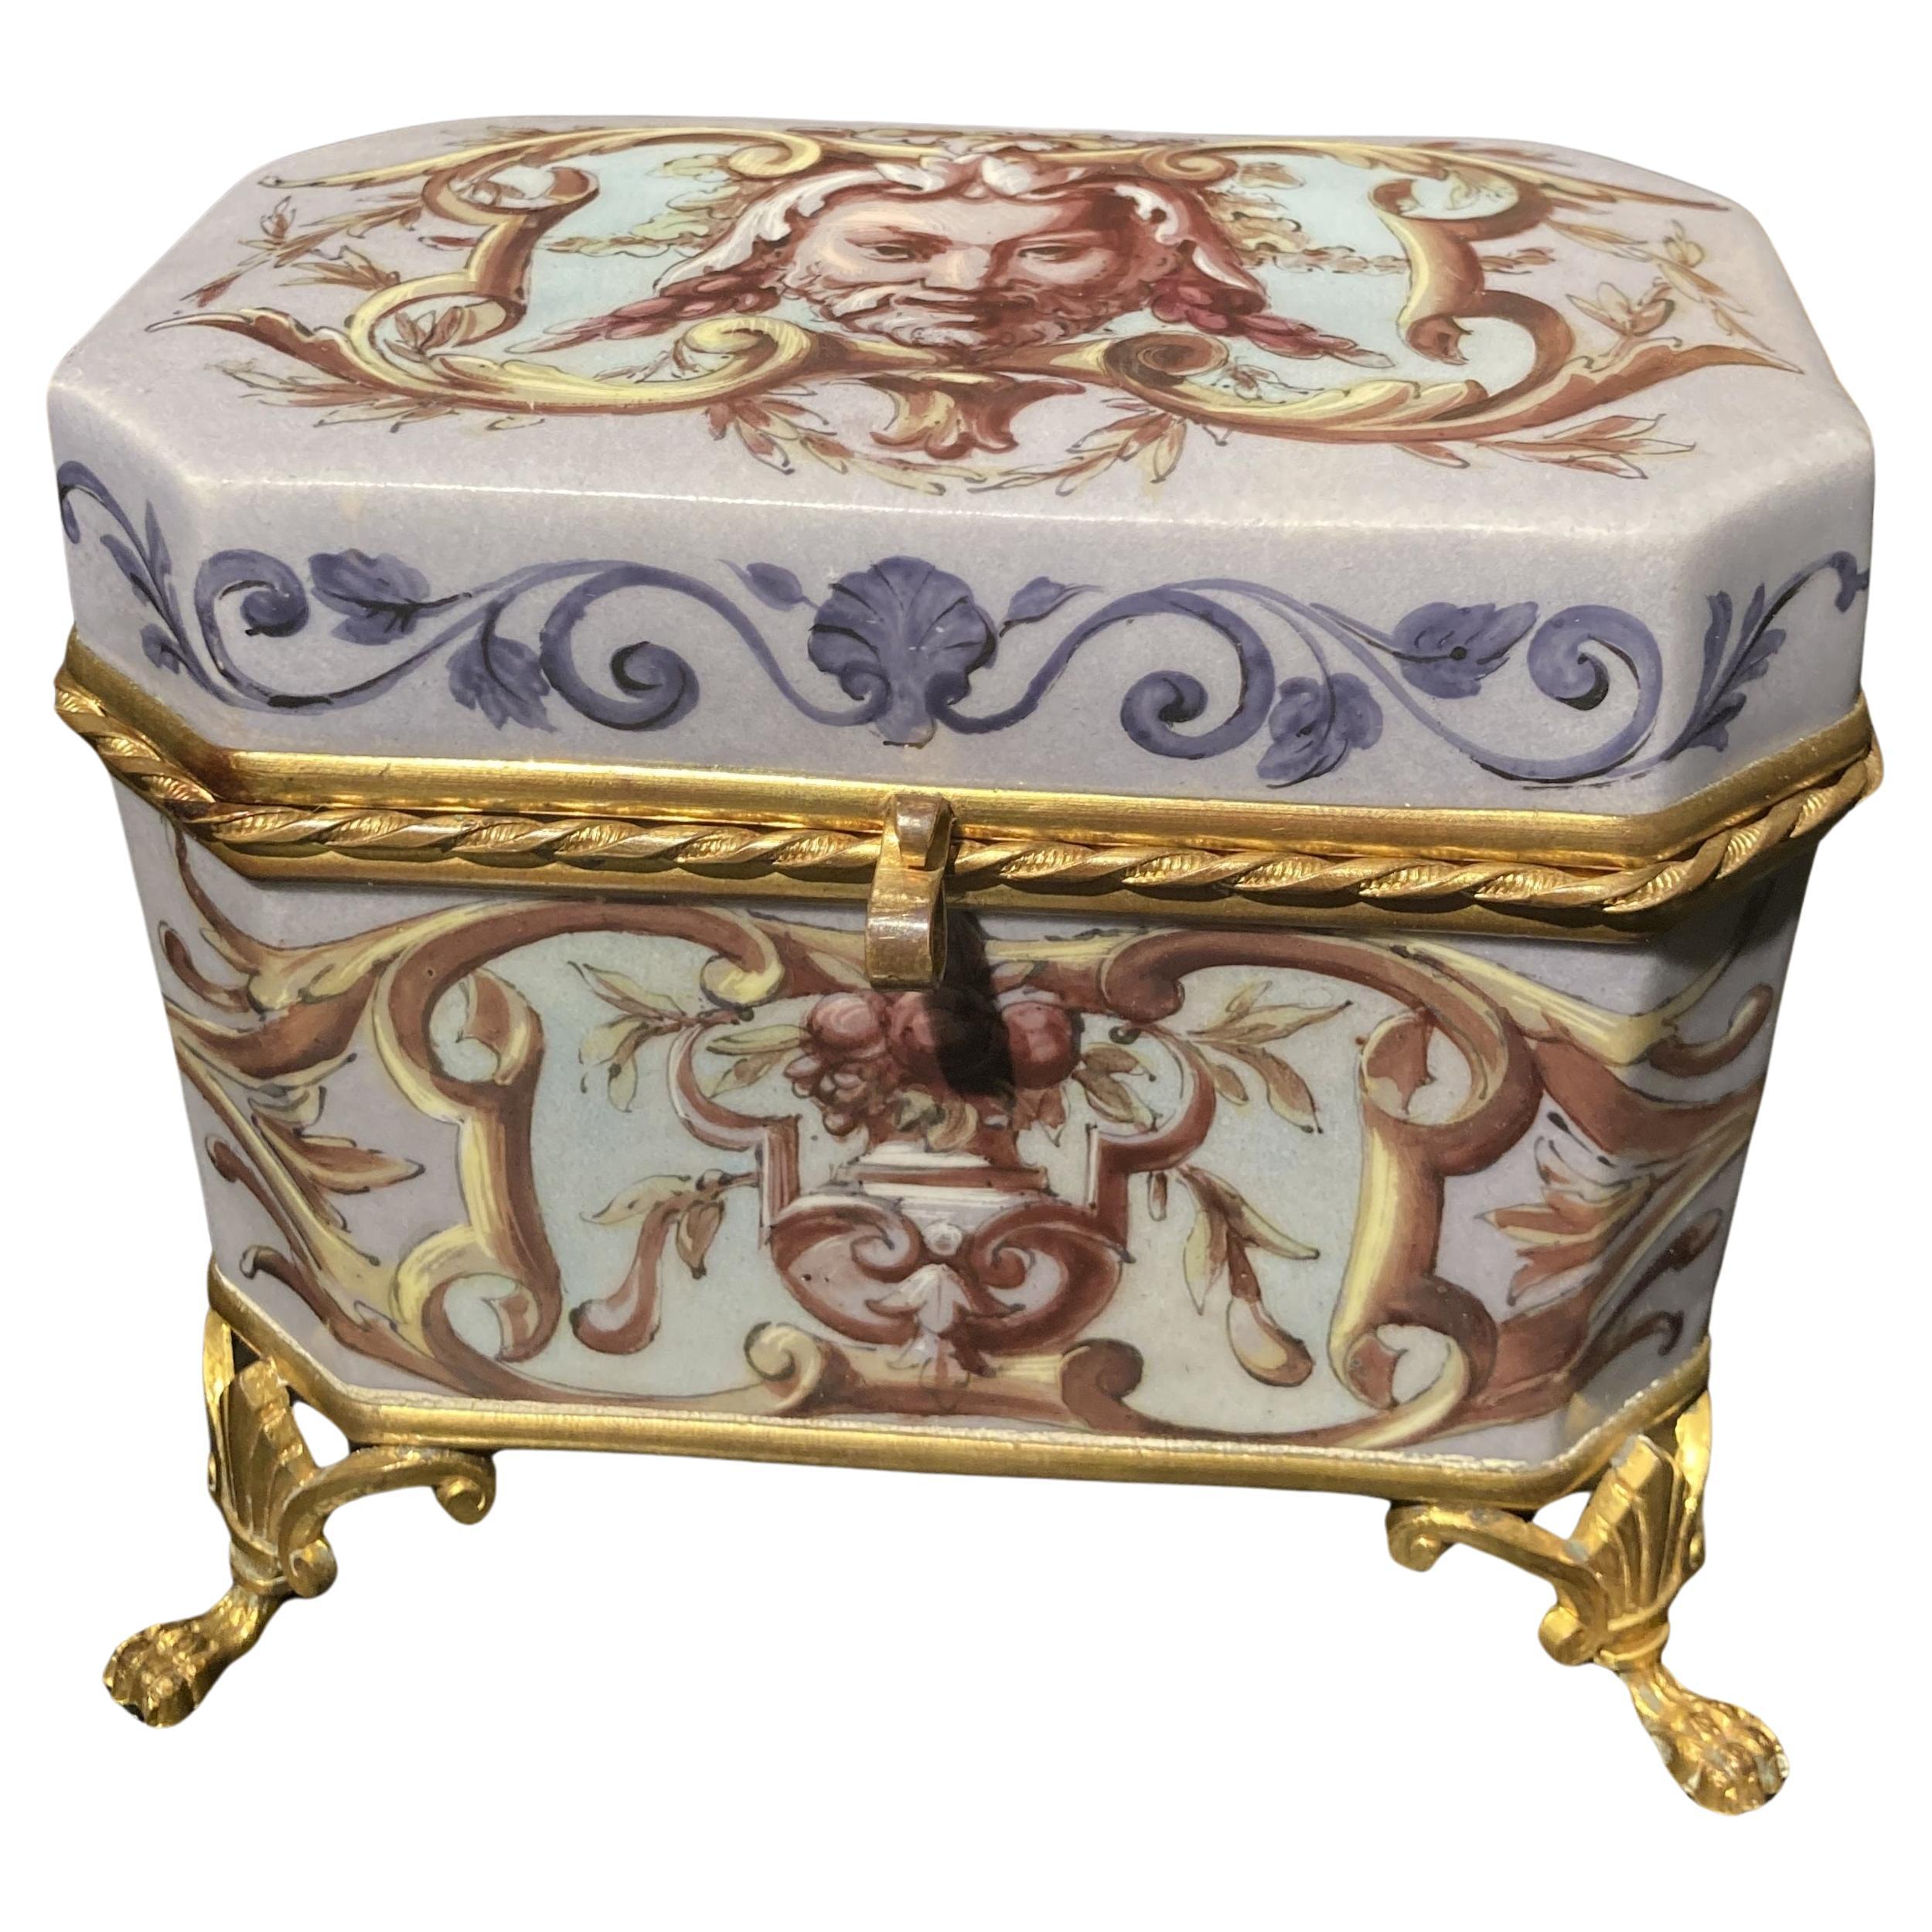 French 19th Century Empire Porcelain and Gilt Bronze Decorative Jewelry Box For Sale